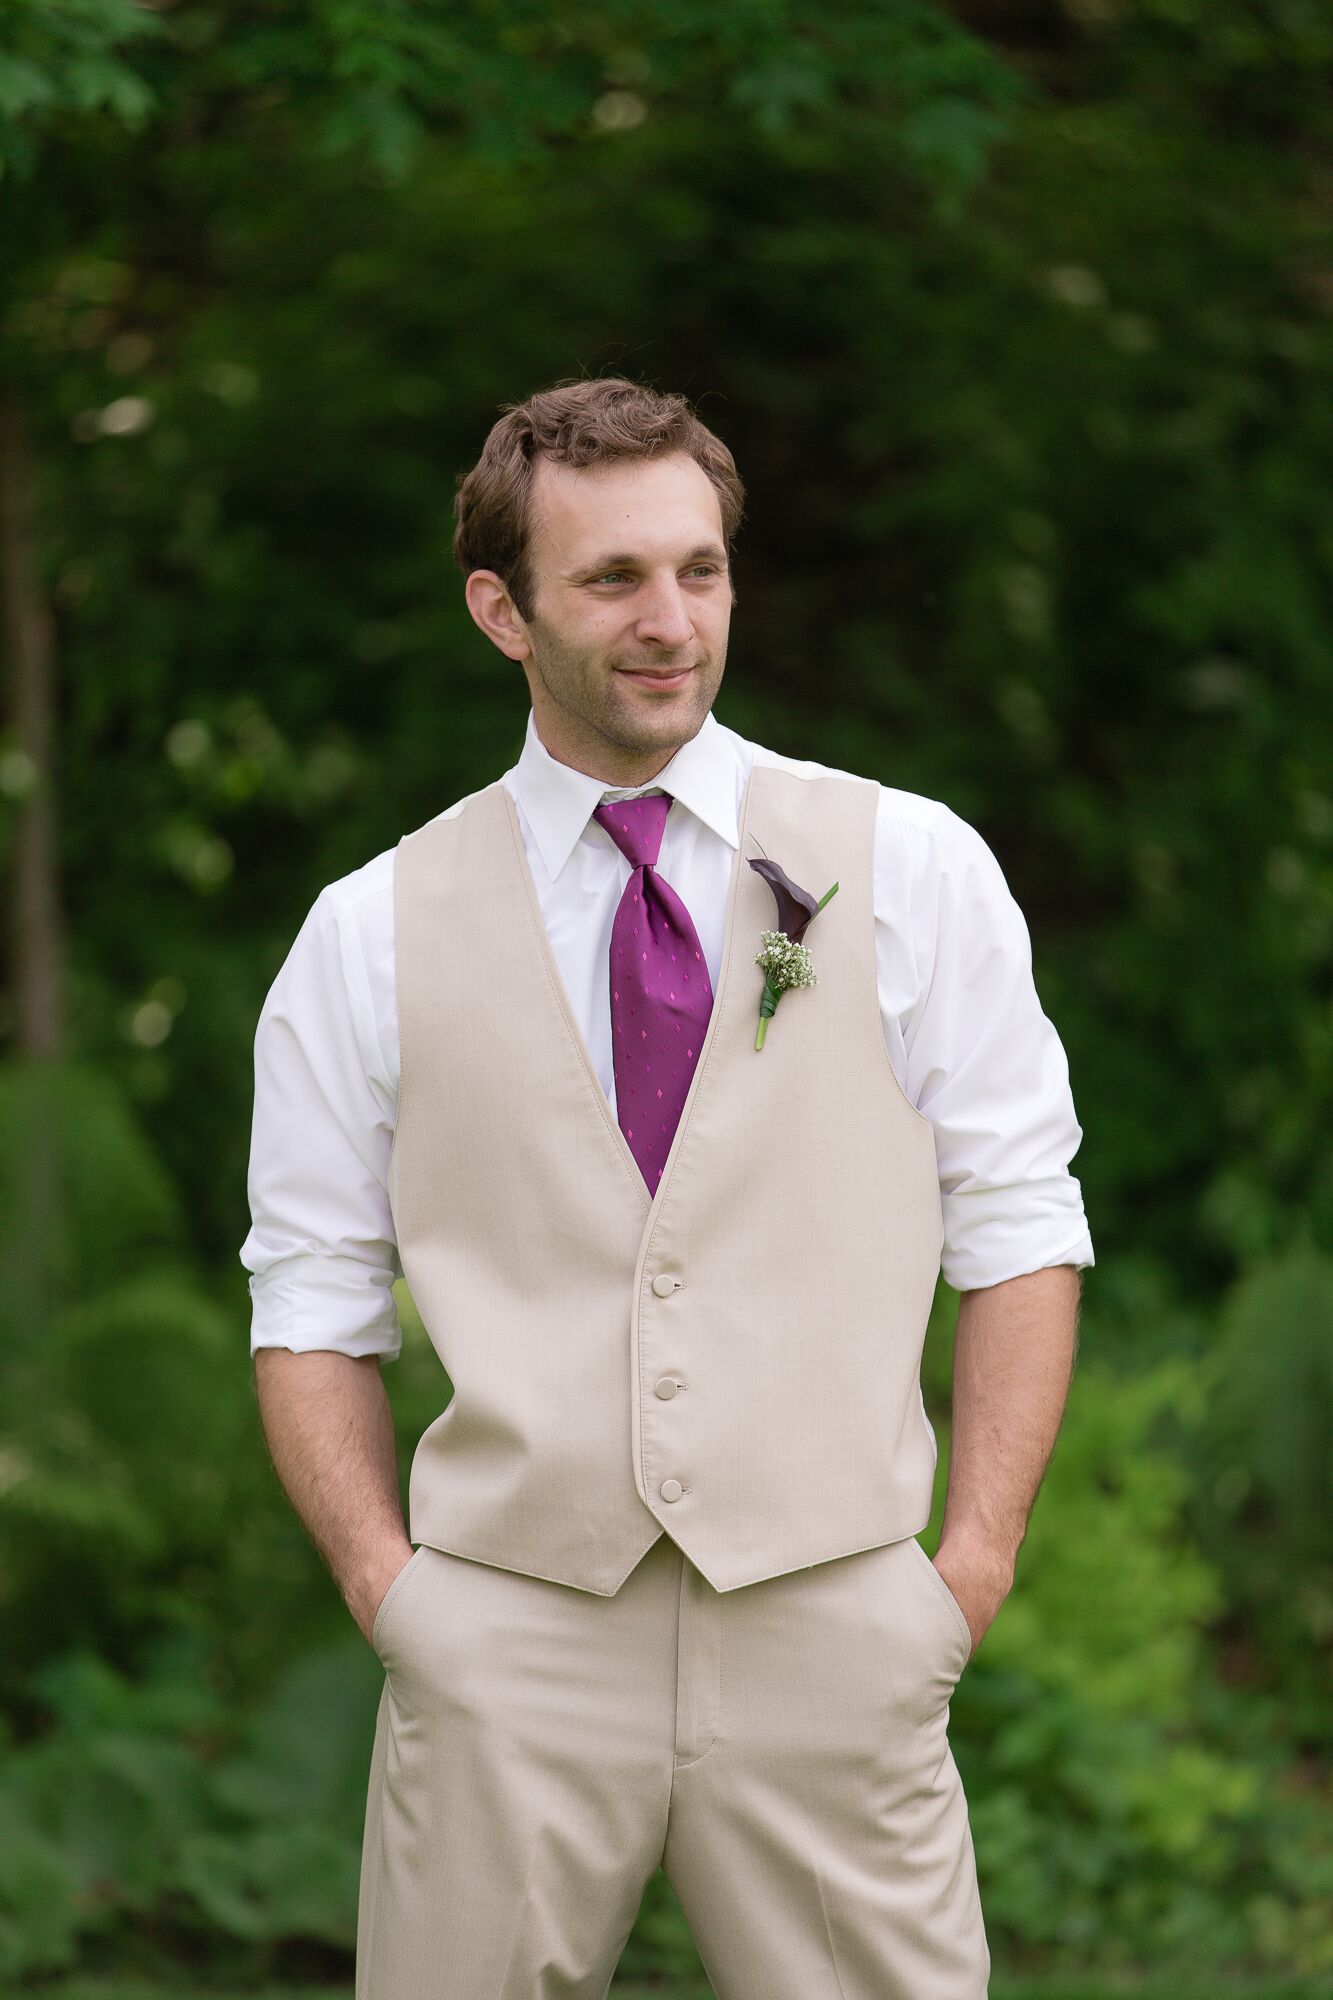 Groom in Khaki with Plum Tie and Boutonniere